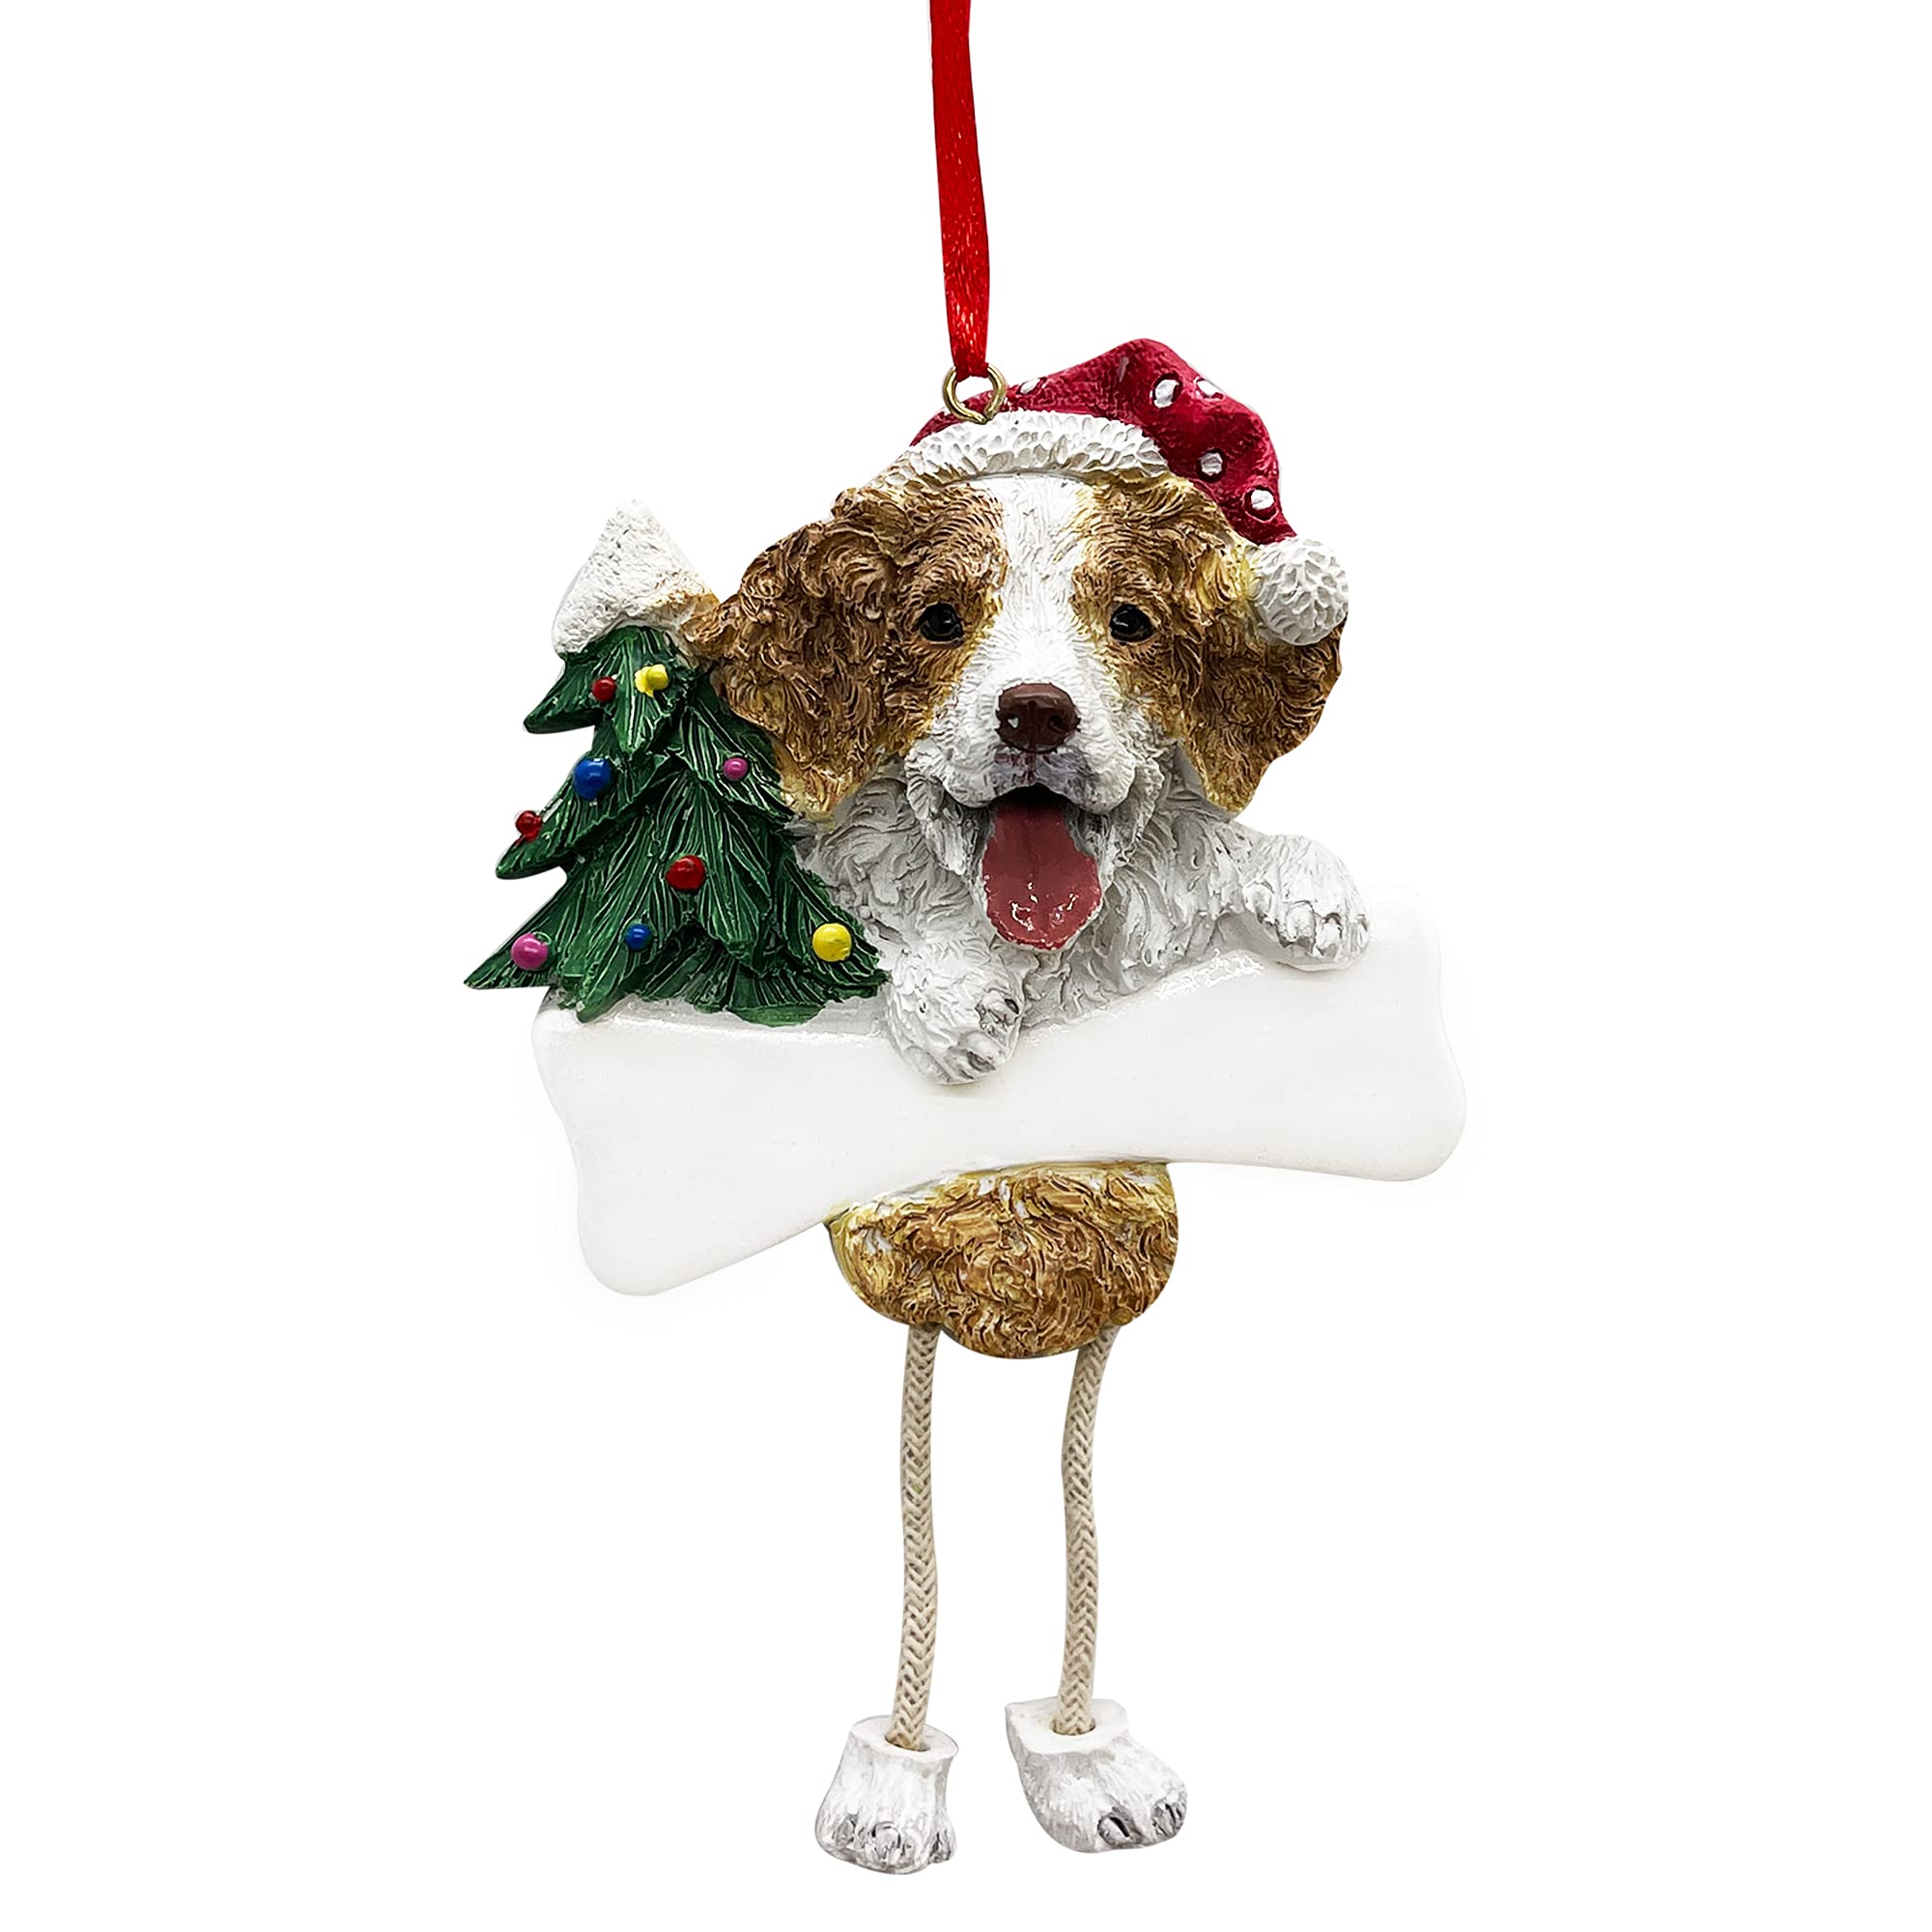 Brittany Spaniel Ornament with Unique "Dangling Legs" Hand Painted and Easily Personalized Christmas Ornament